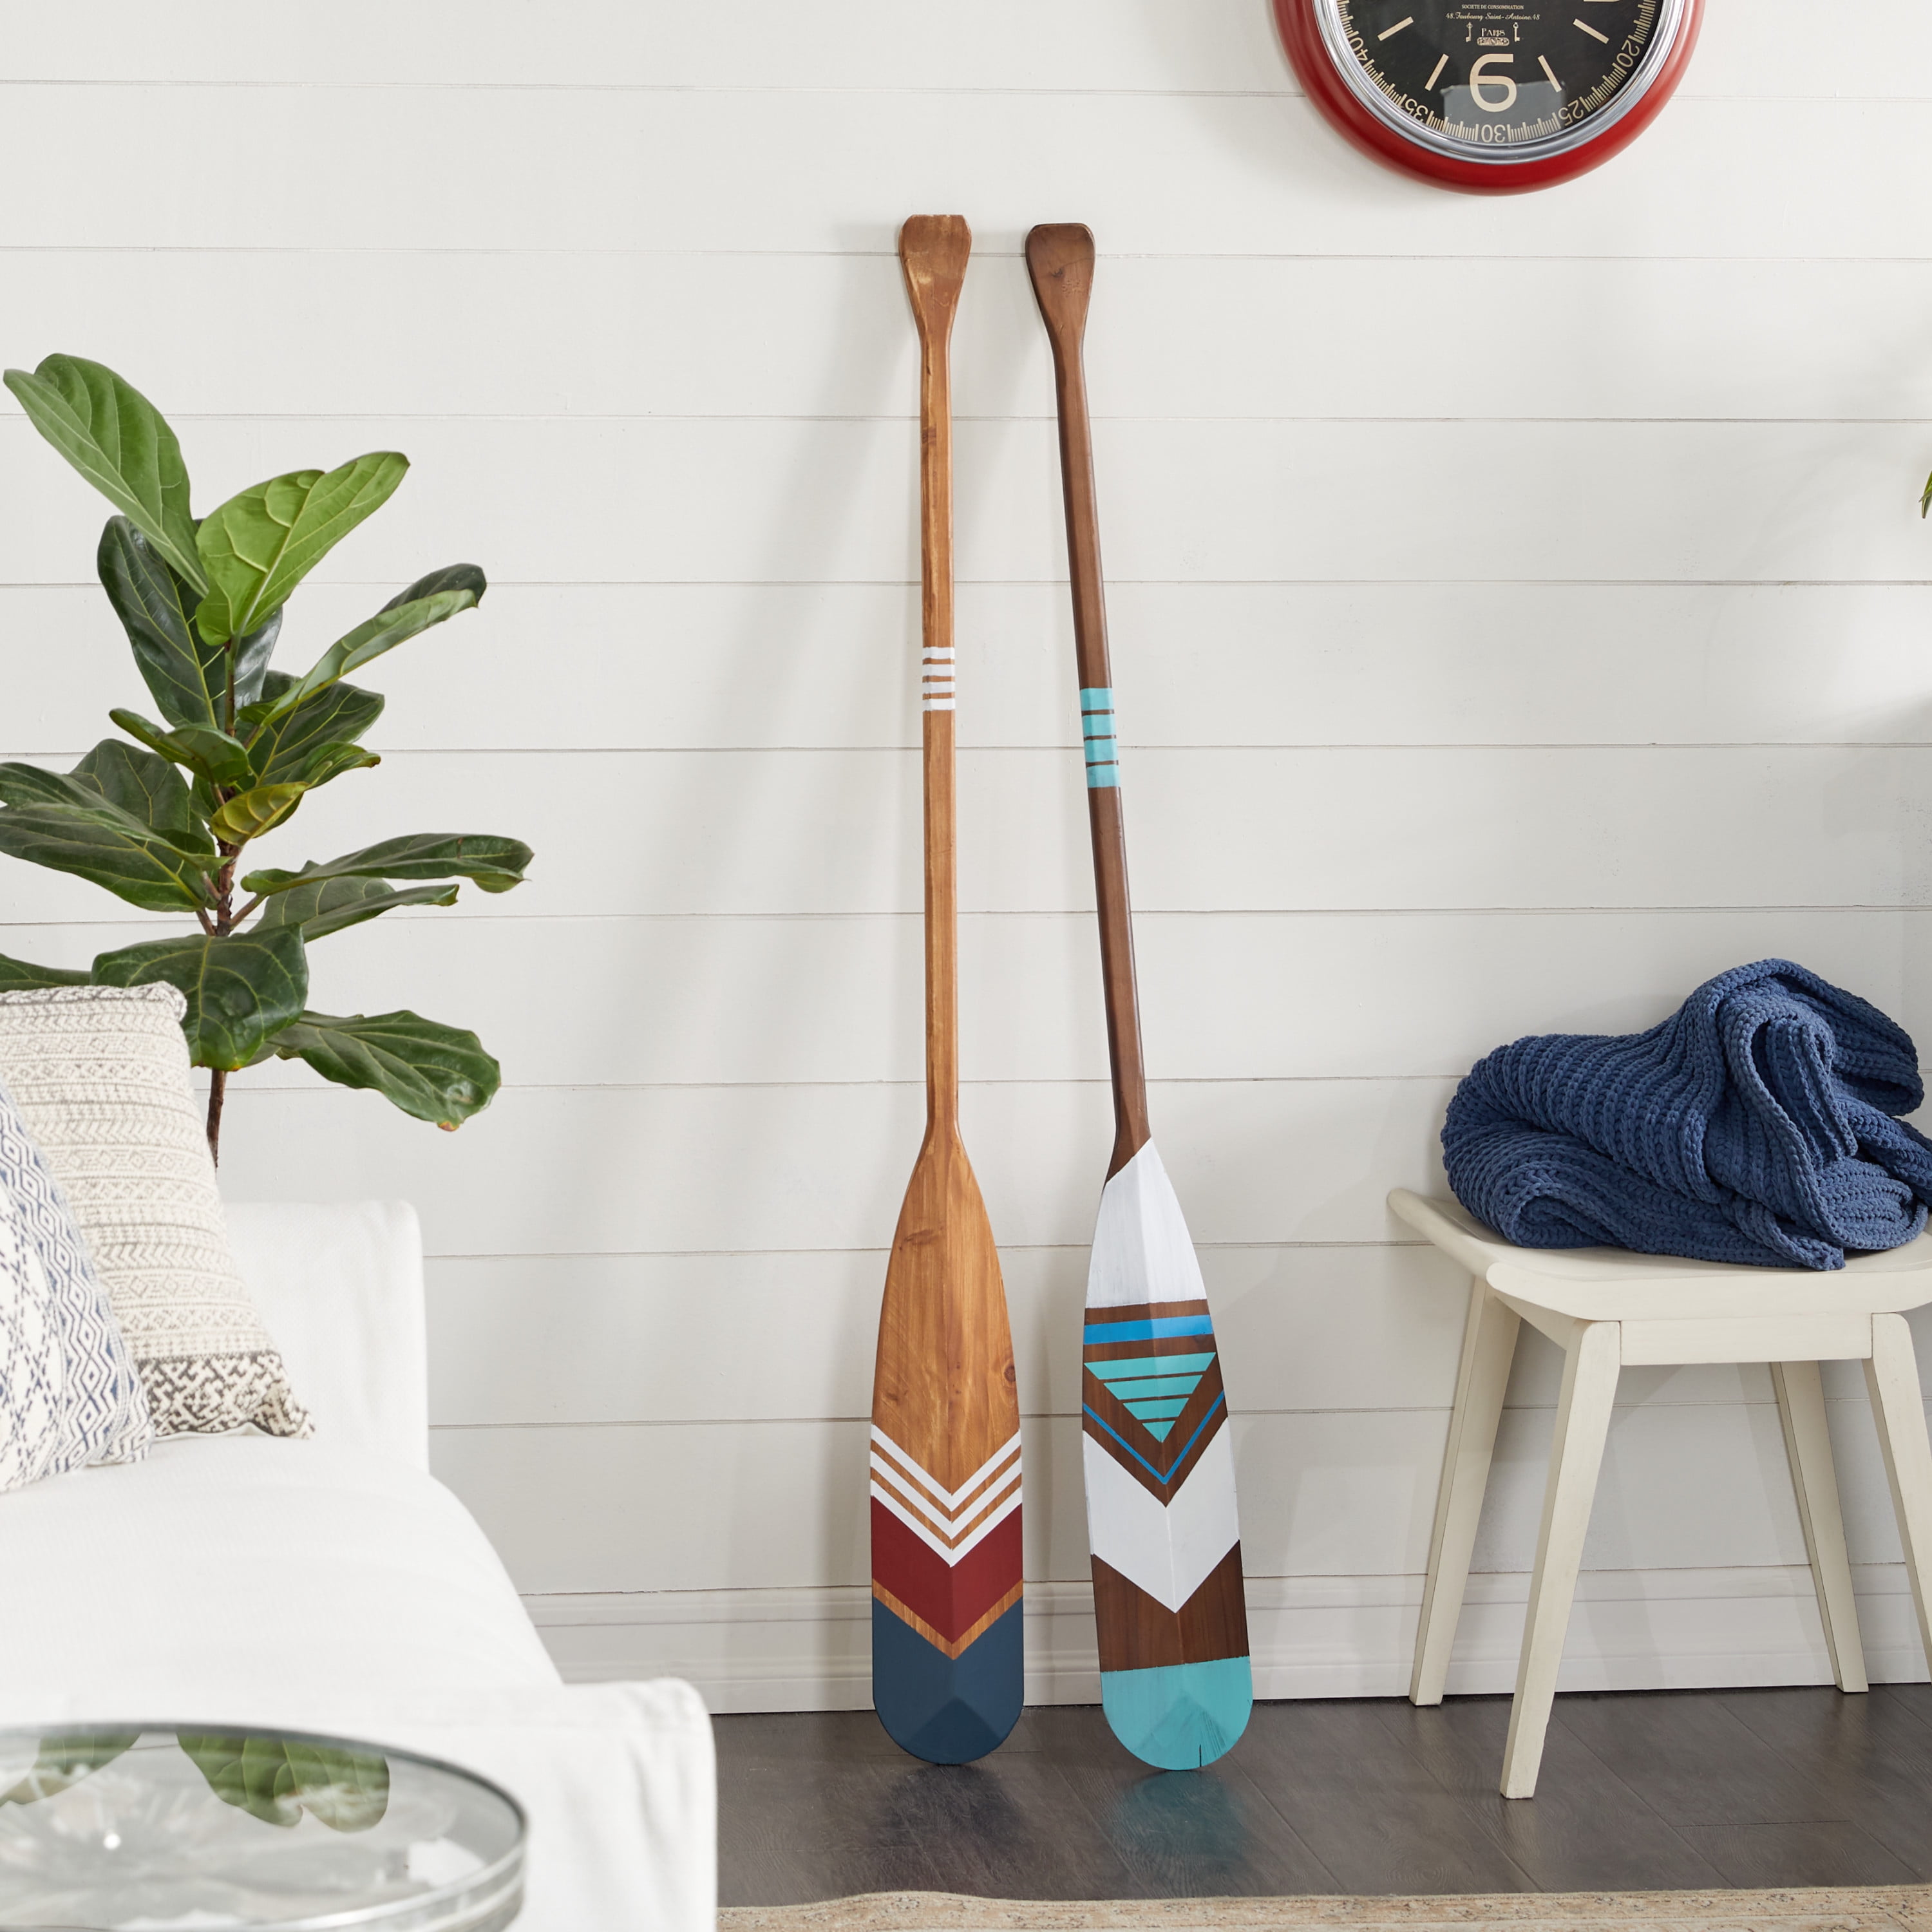 Coastal Wood Novelty Canoe Oar Paddle Wall Decor with Arrow and Stripe Patterns Breakwater Bay Color/Finish: Light Gray/Brown/White